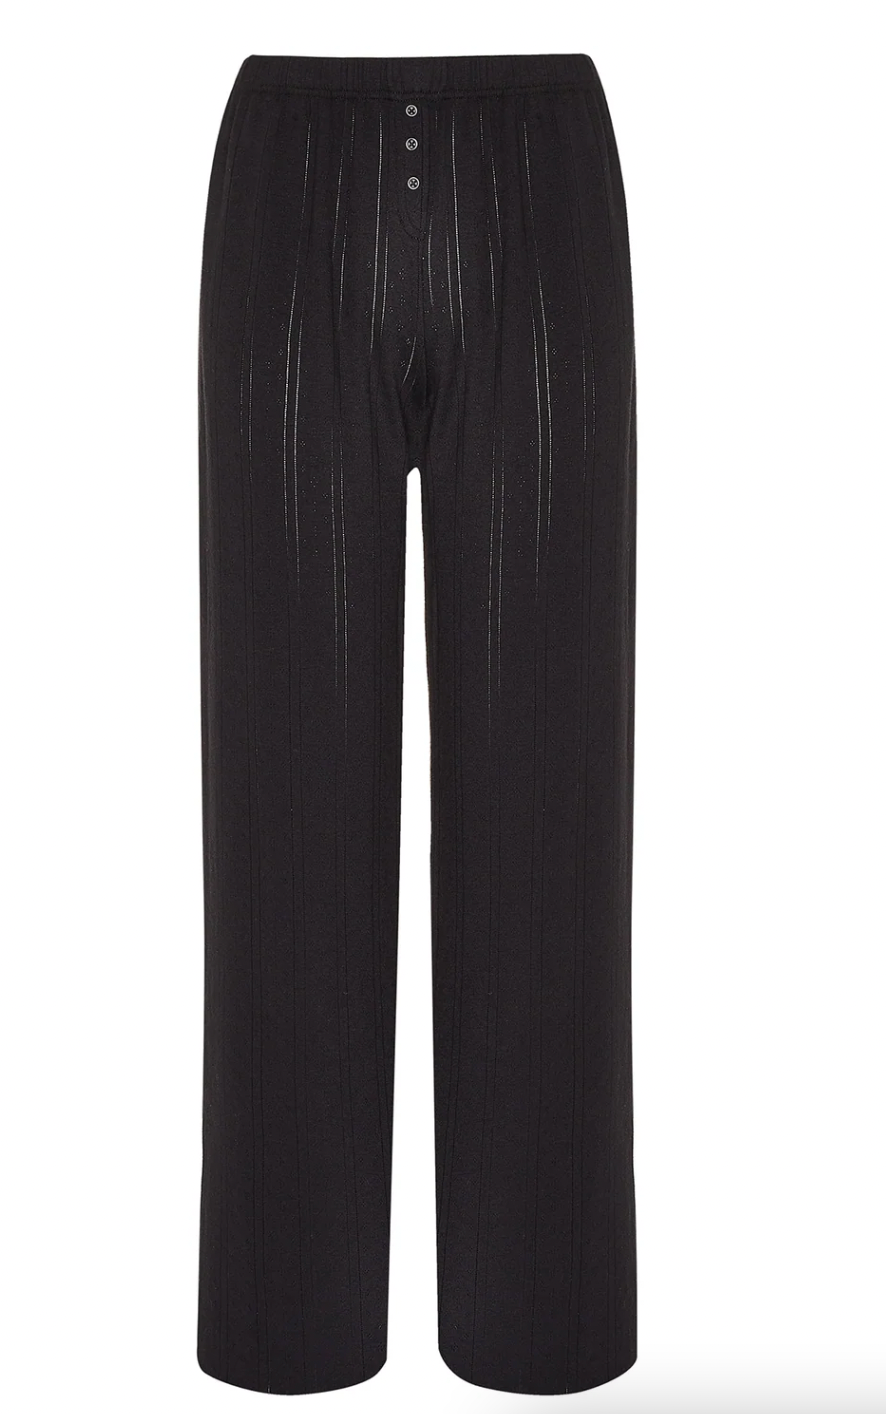 Product Image for The Lounge Pant, Black